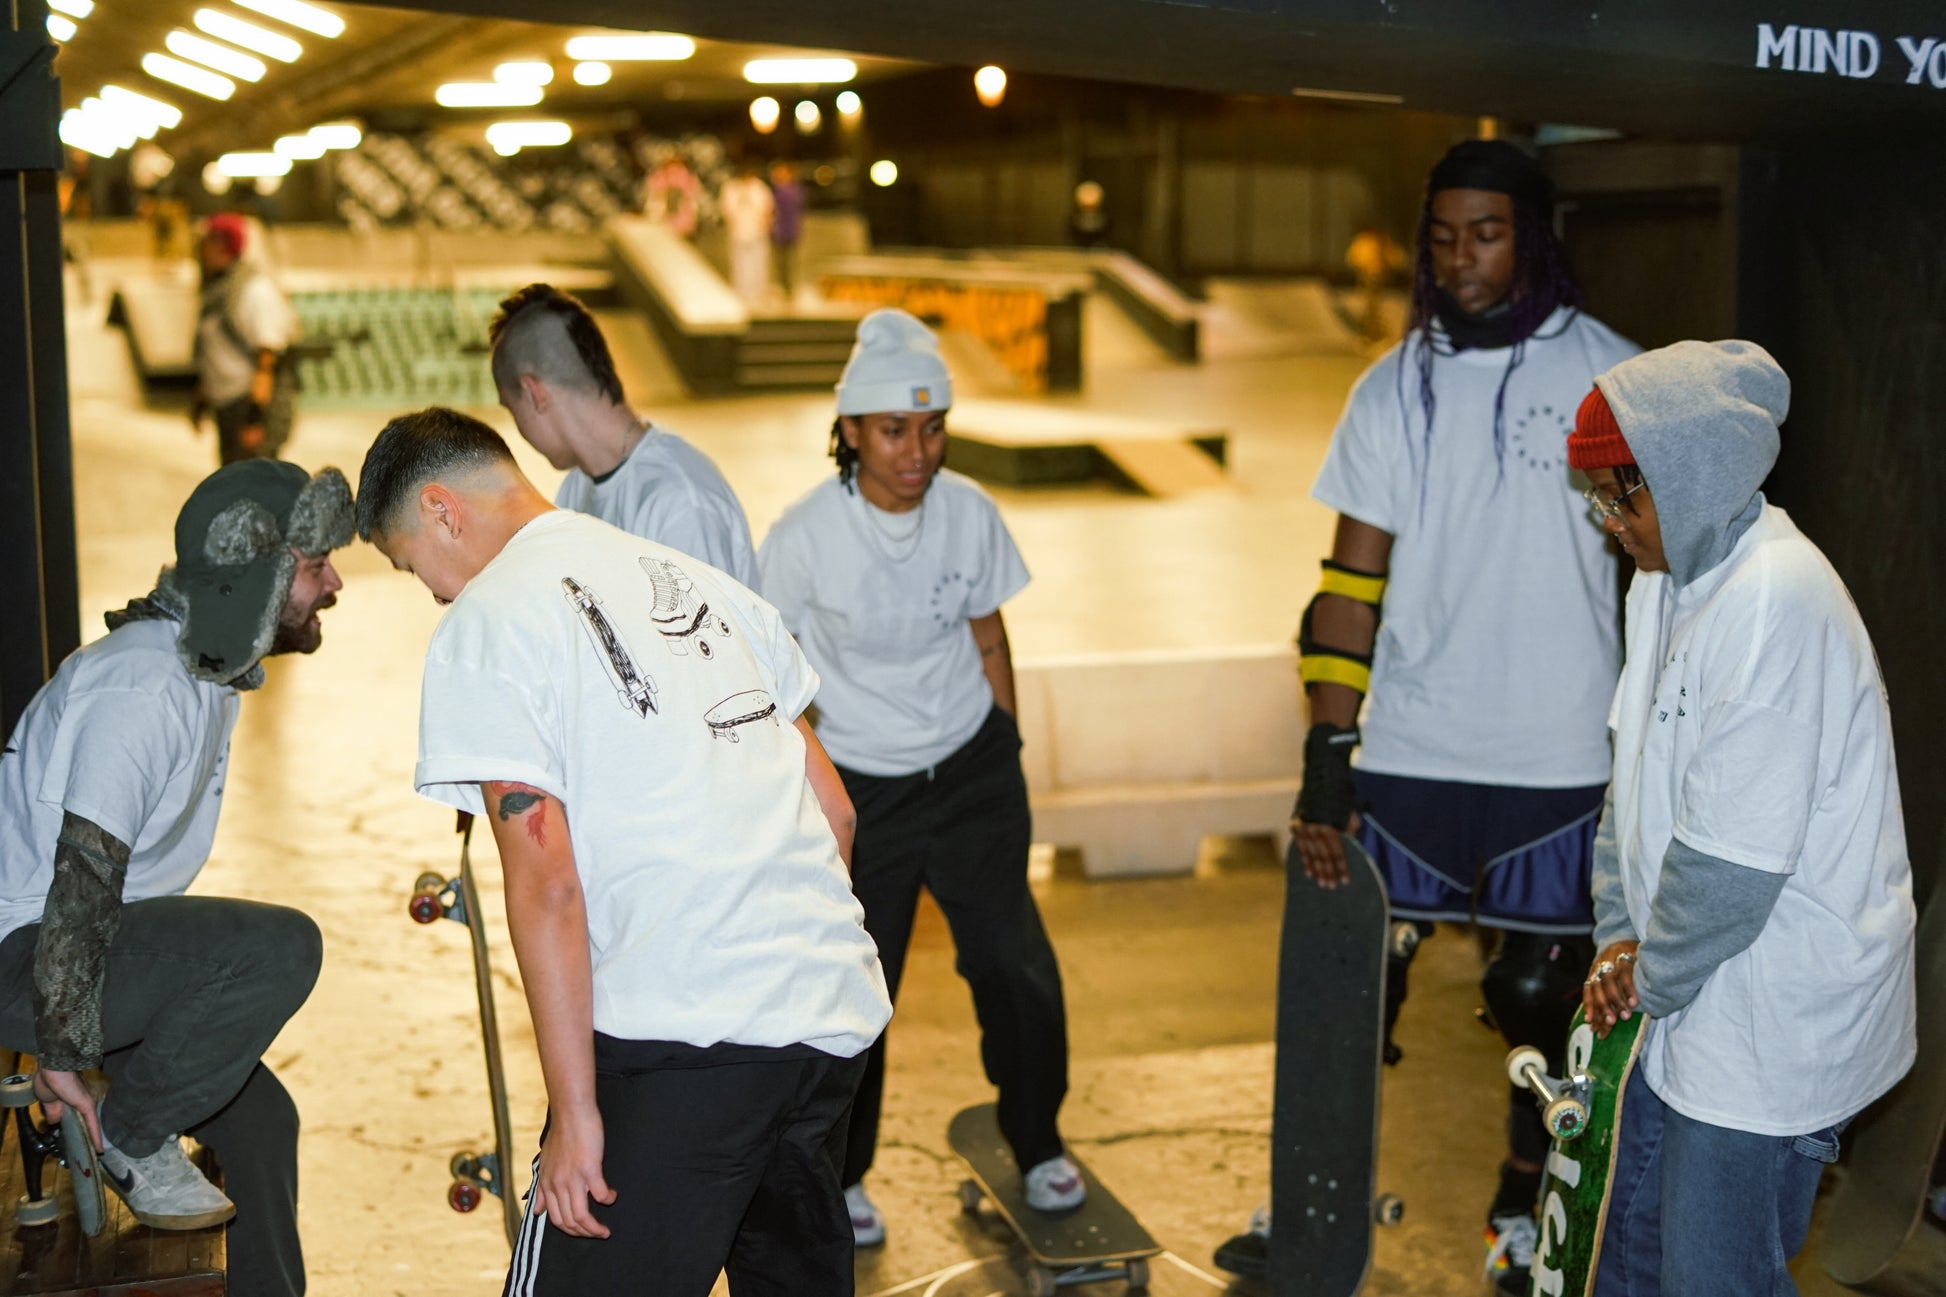  a scene of 6 skaters, all wearing Transkaters white t-shirts, the person on the far left wearing a winter hat and facing the group, the person in the middle standing on the skateboard, and two skaters in the right looking down holding their skateboards 